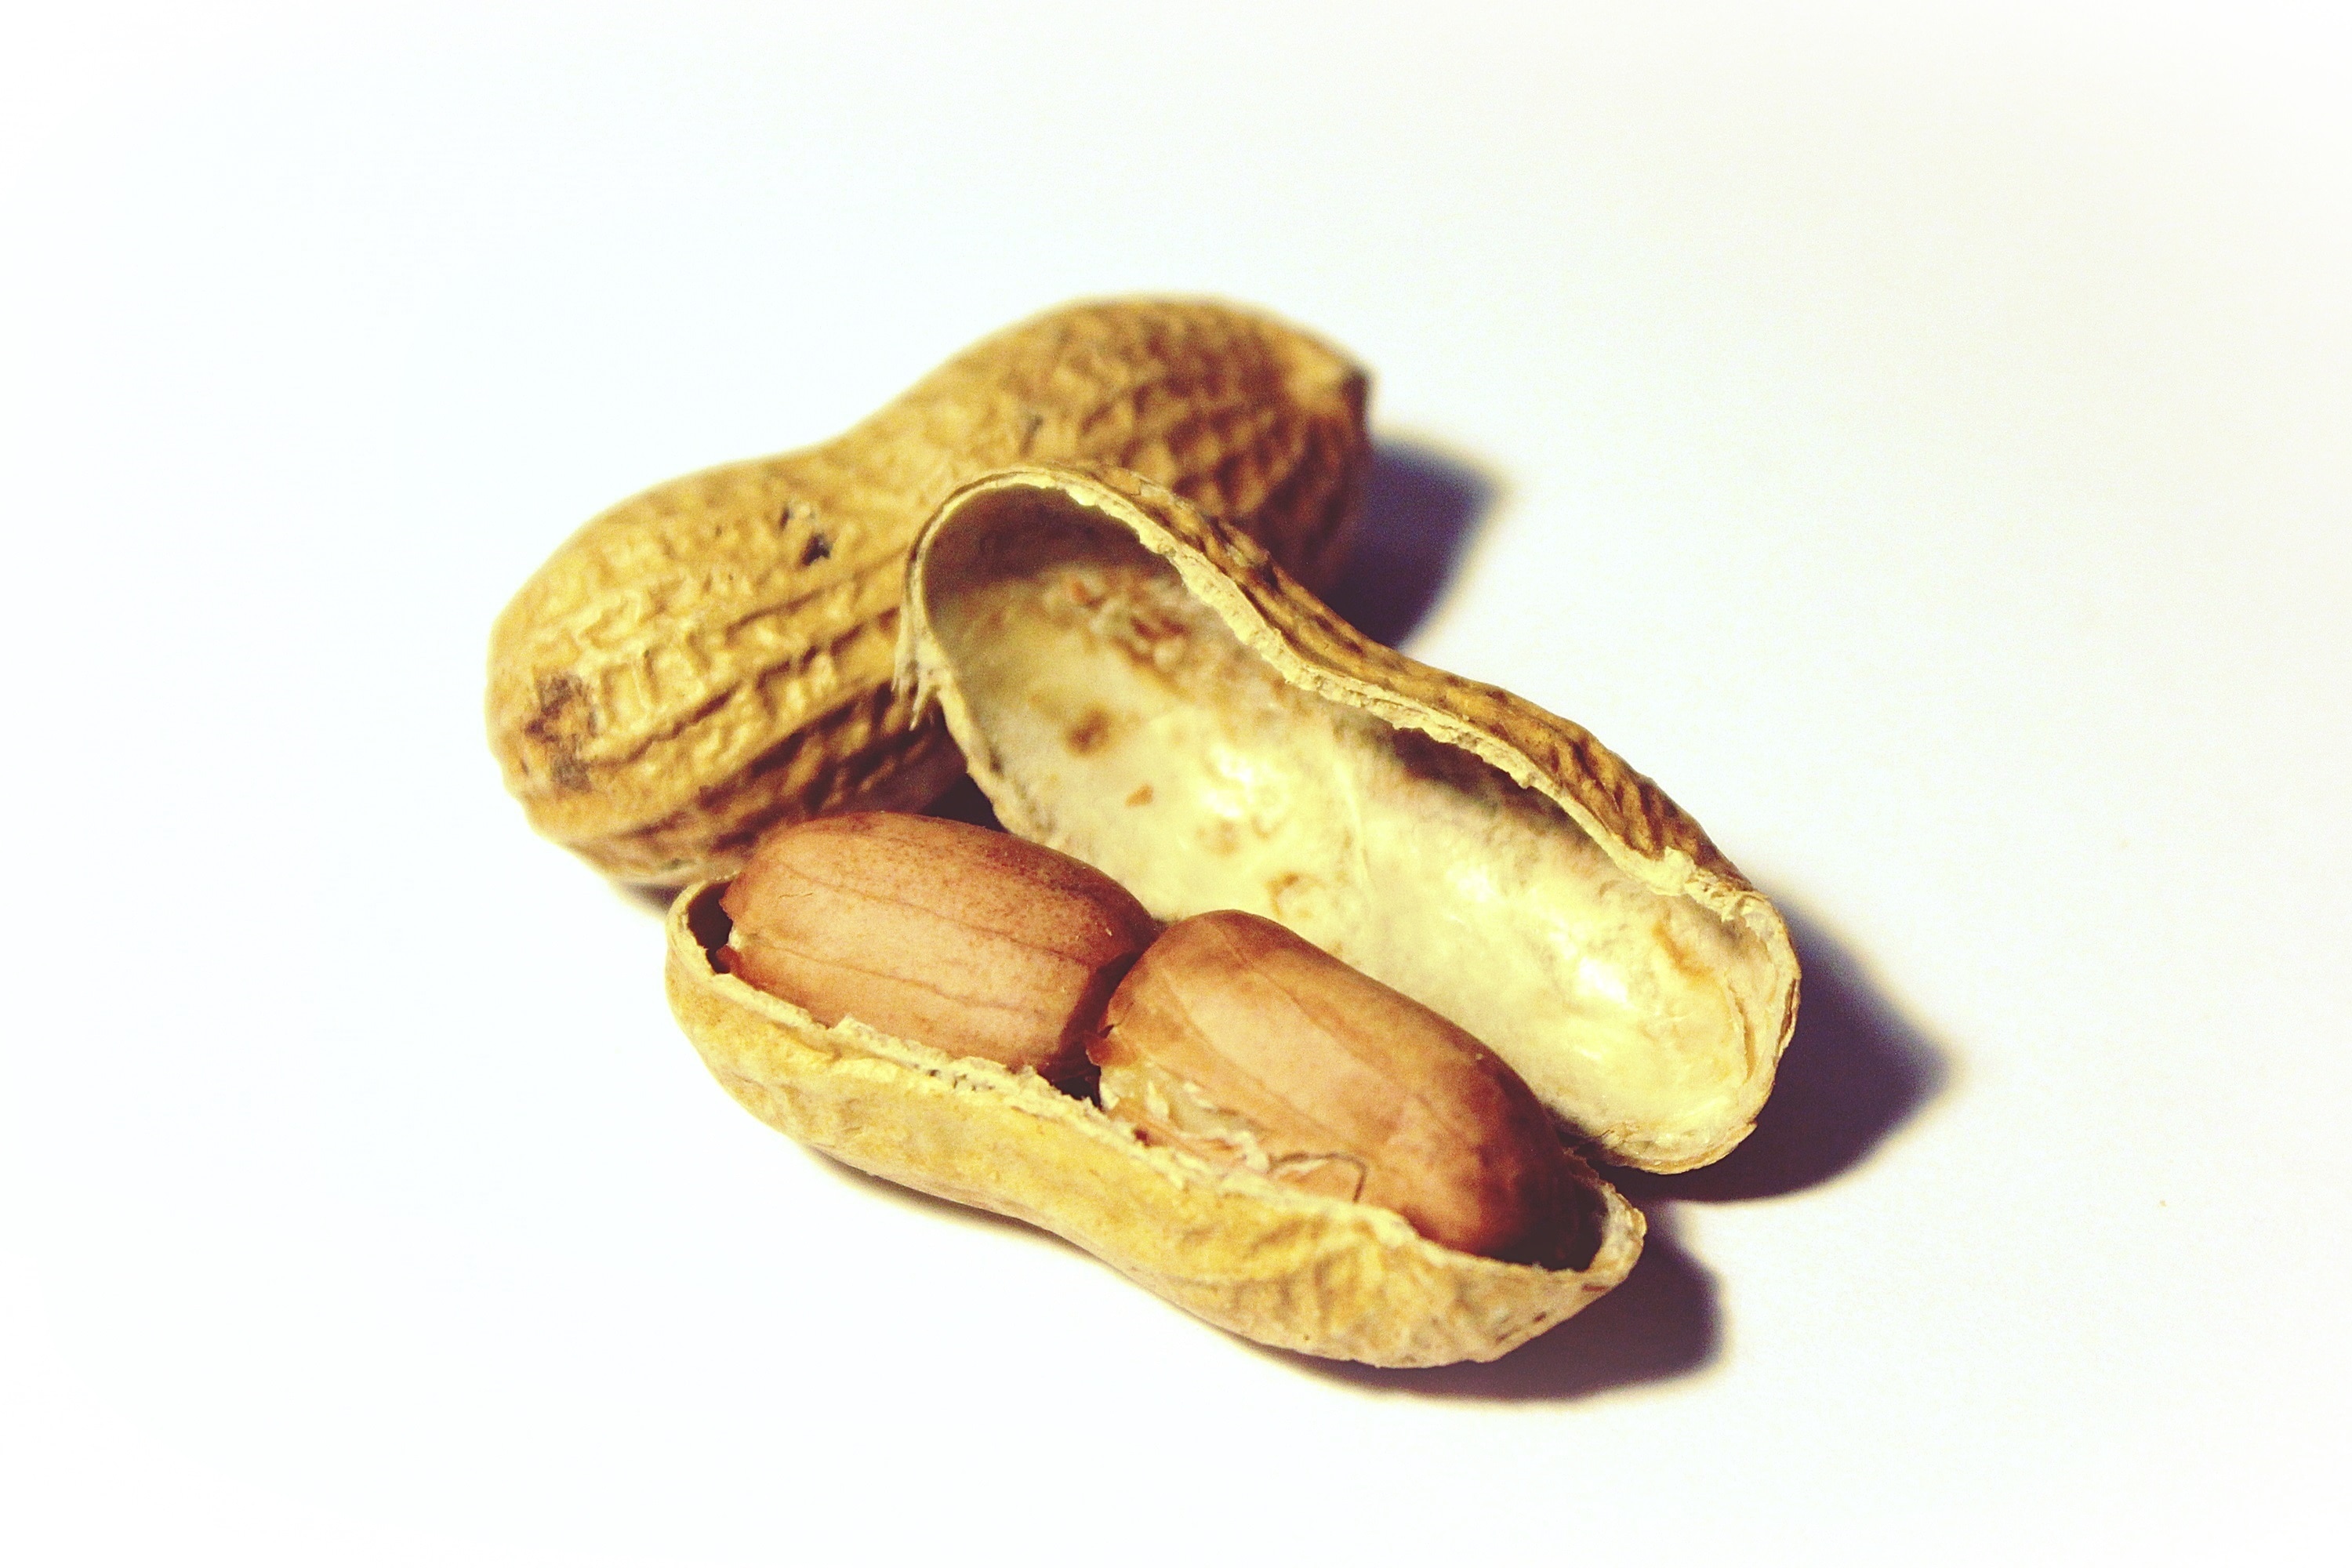 Nutrition, Snack, Peanuts, Healthy, Nuts, white background, food and drink